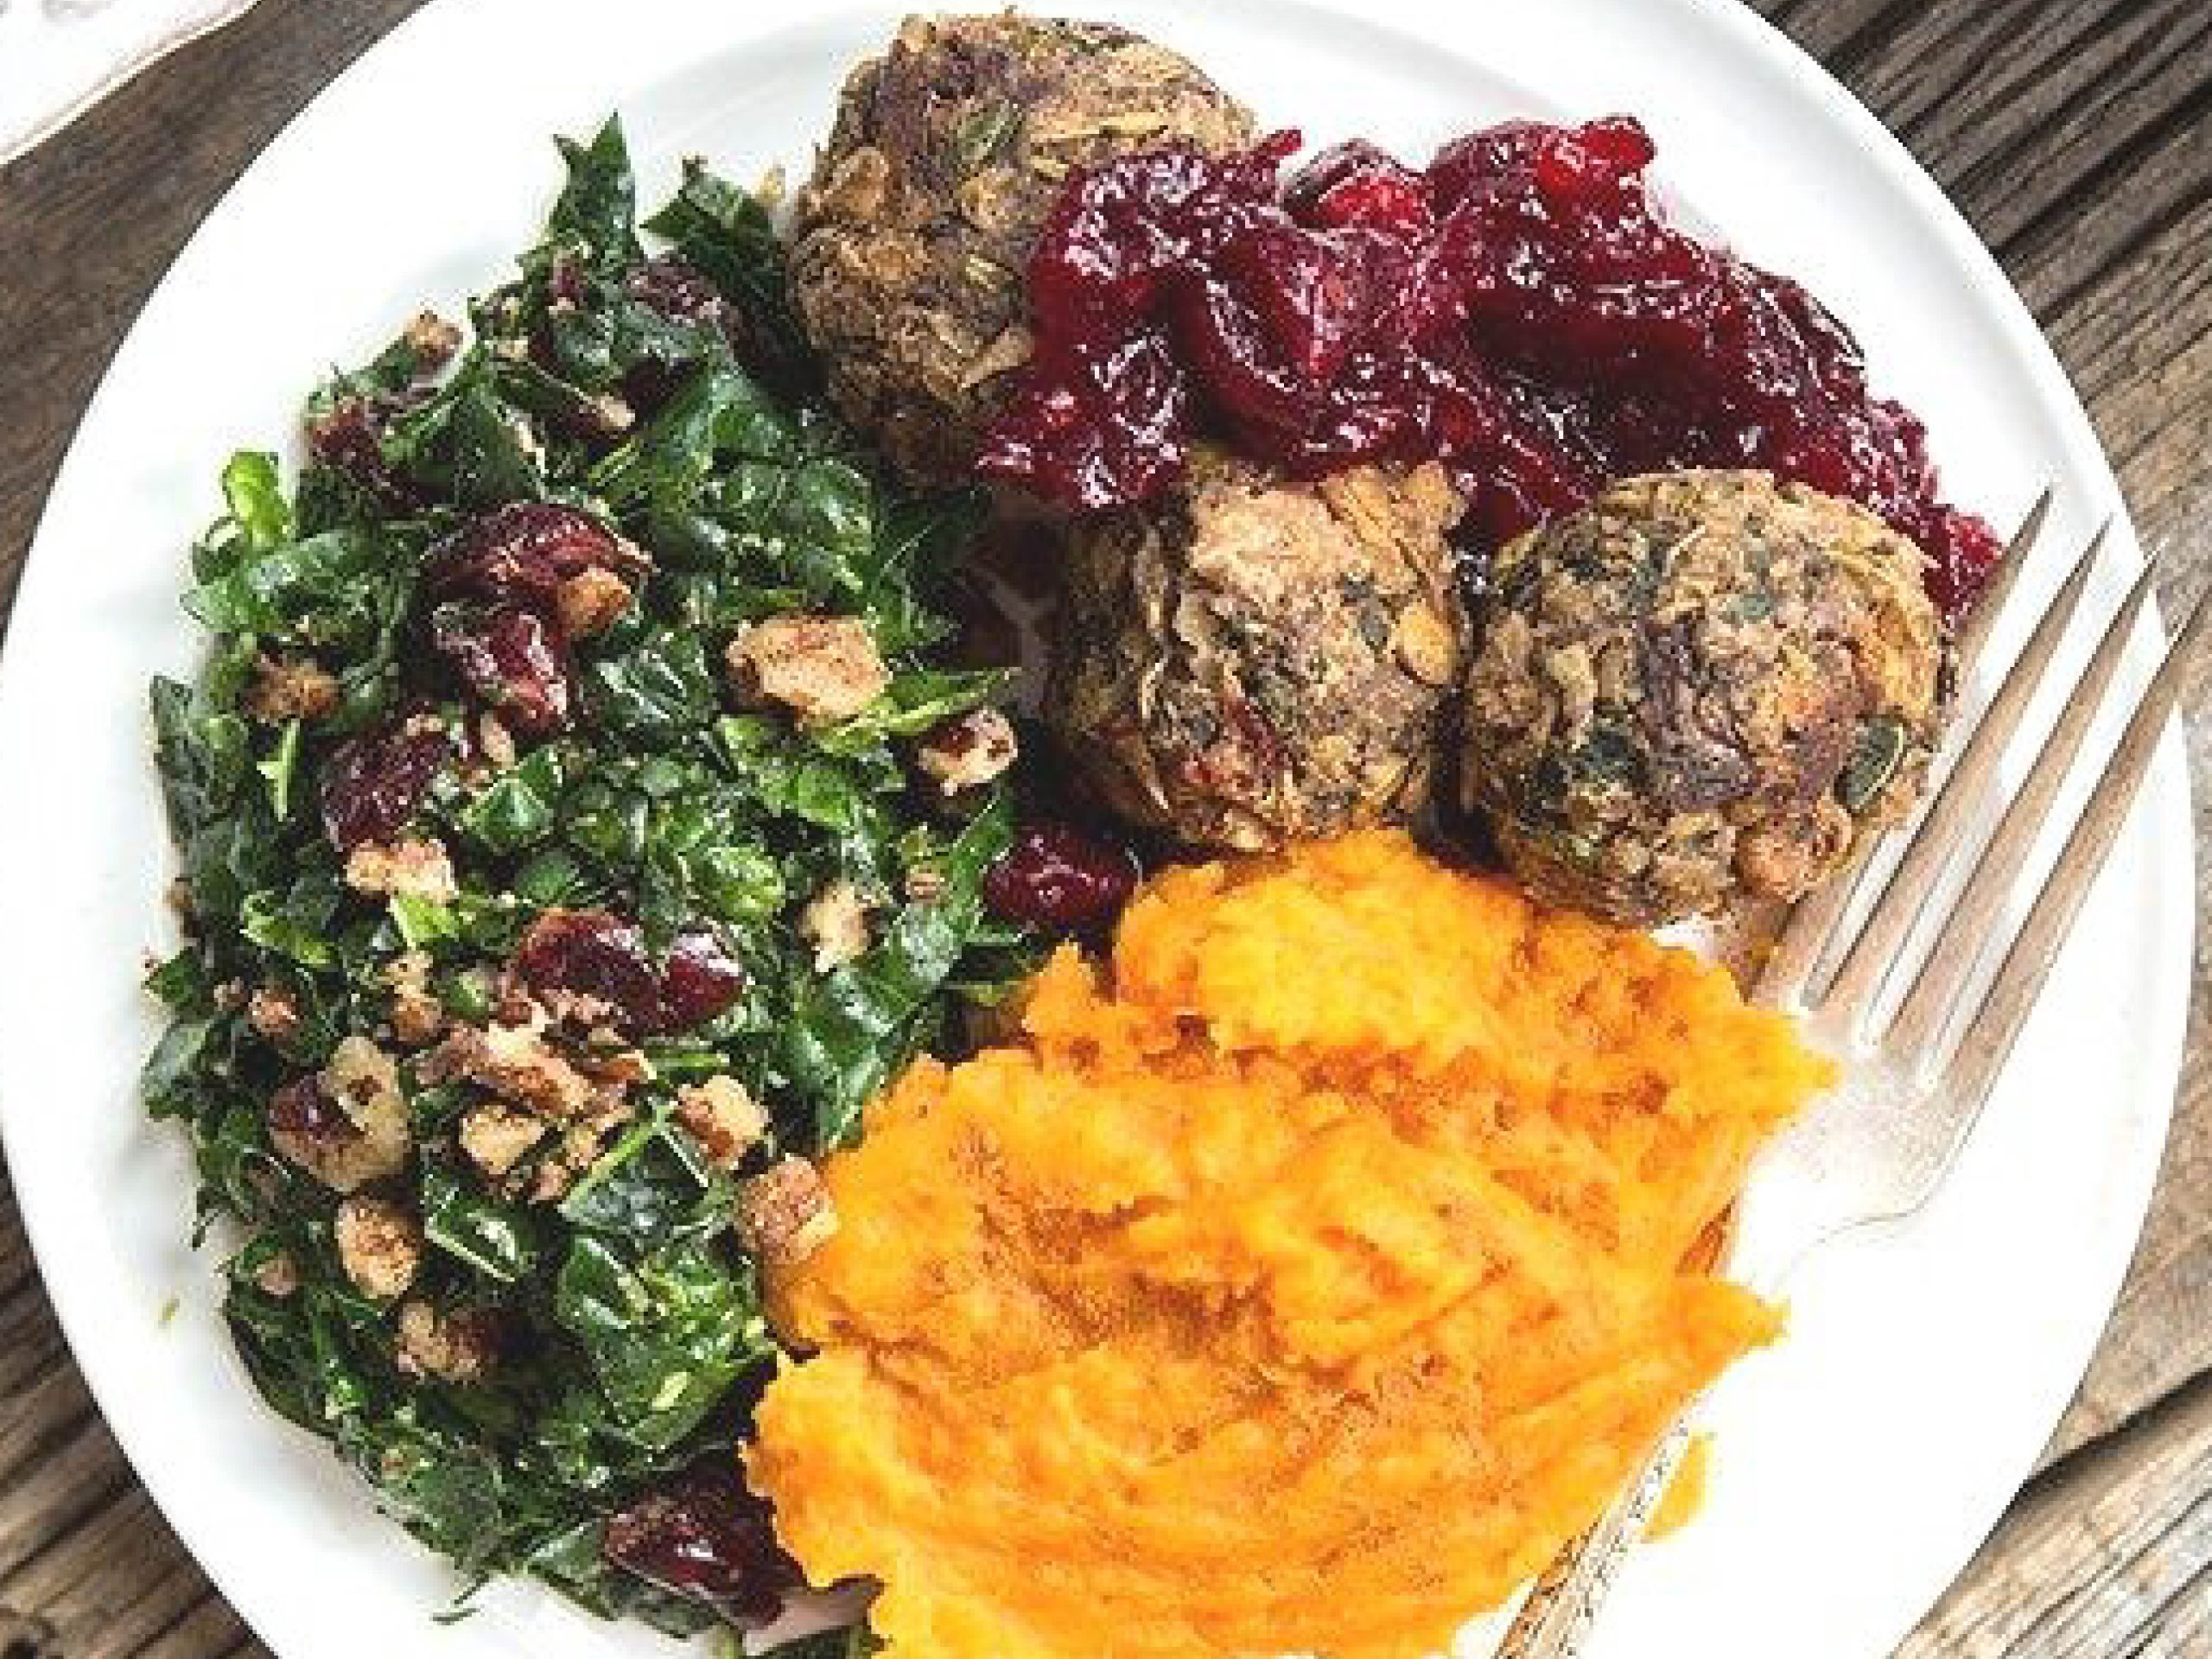 8 tips for navigating holiday meals as a vegan